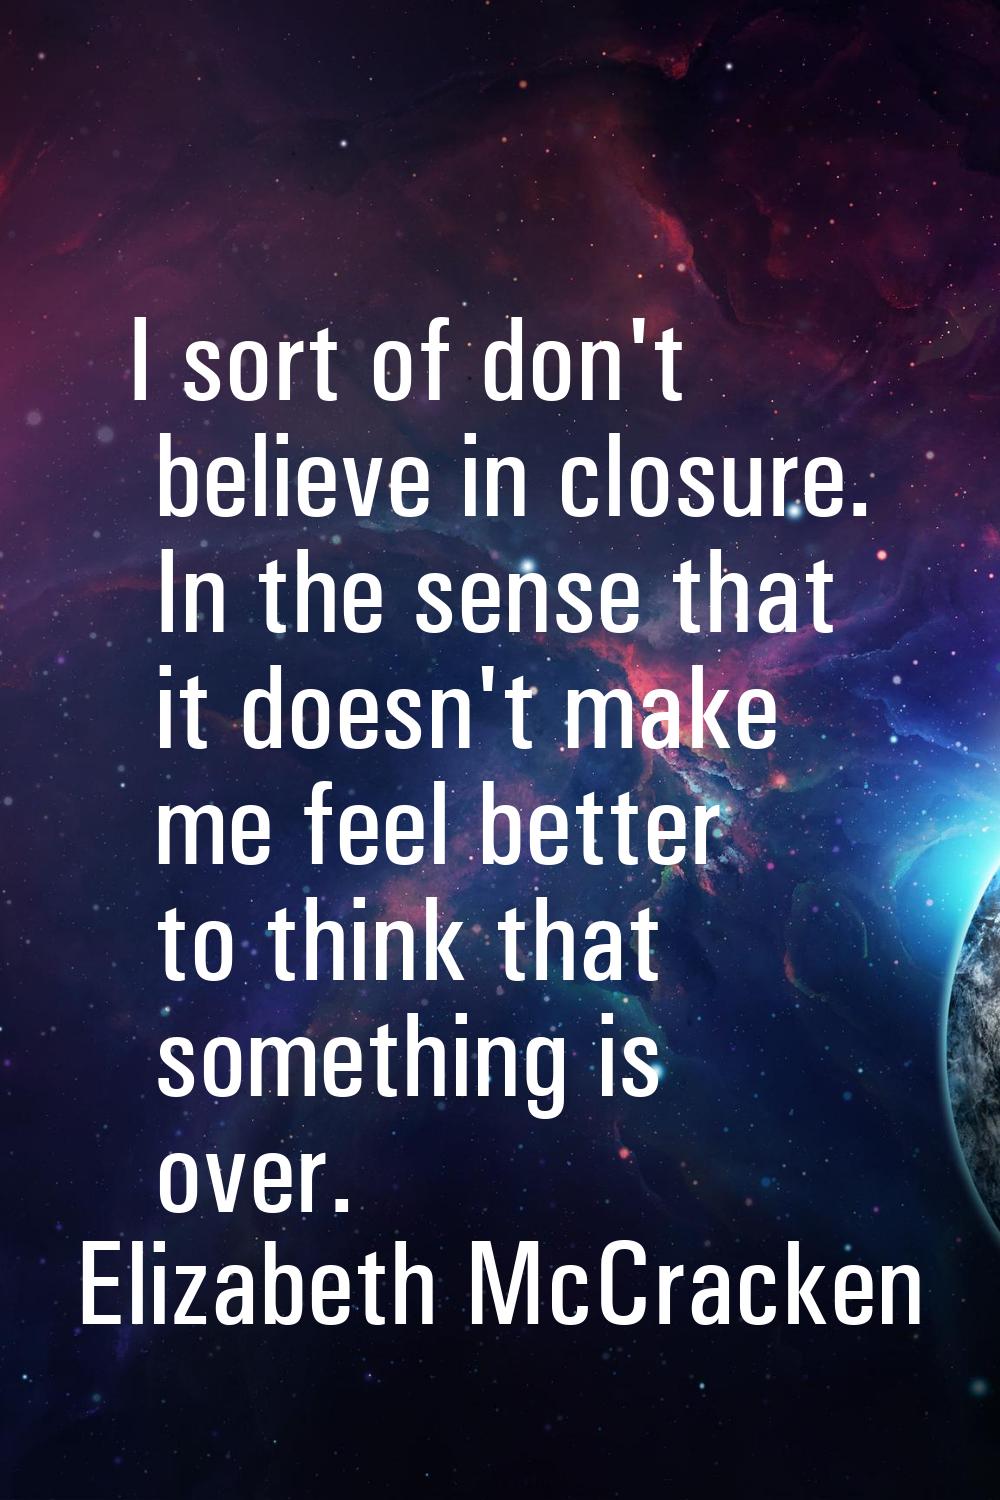 I sort of don't believe in closure. In the sense that it doesn't make me feel better to think that 